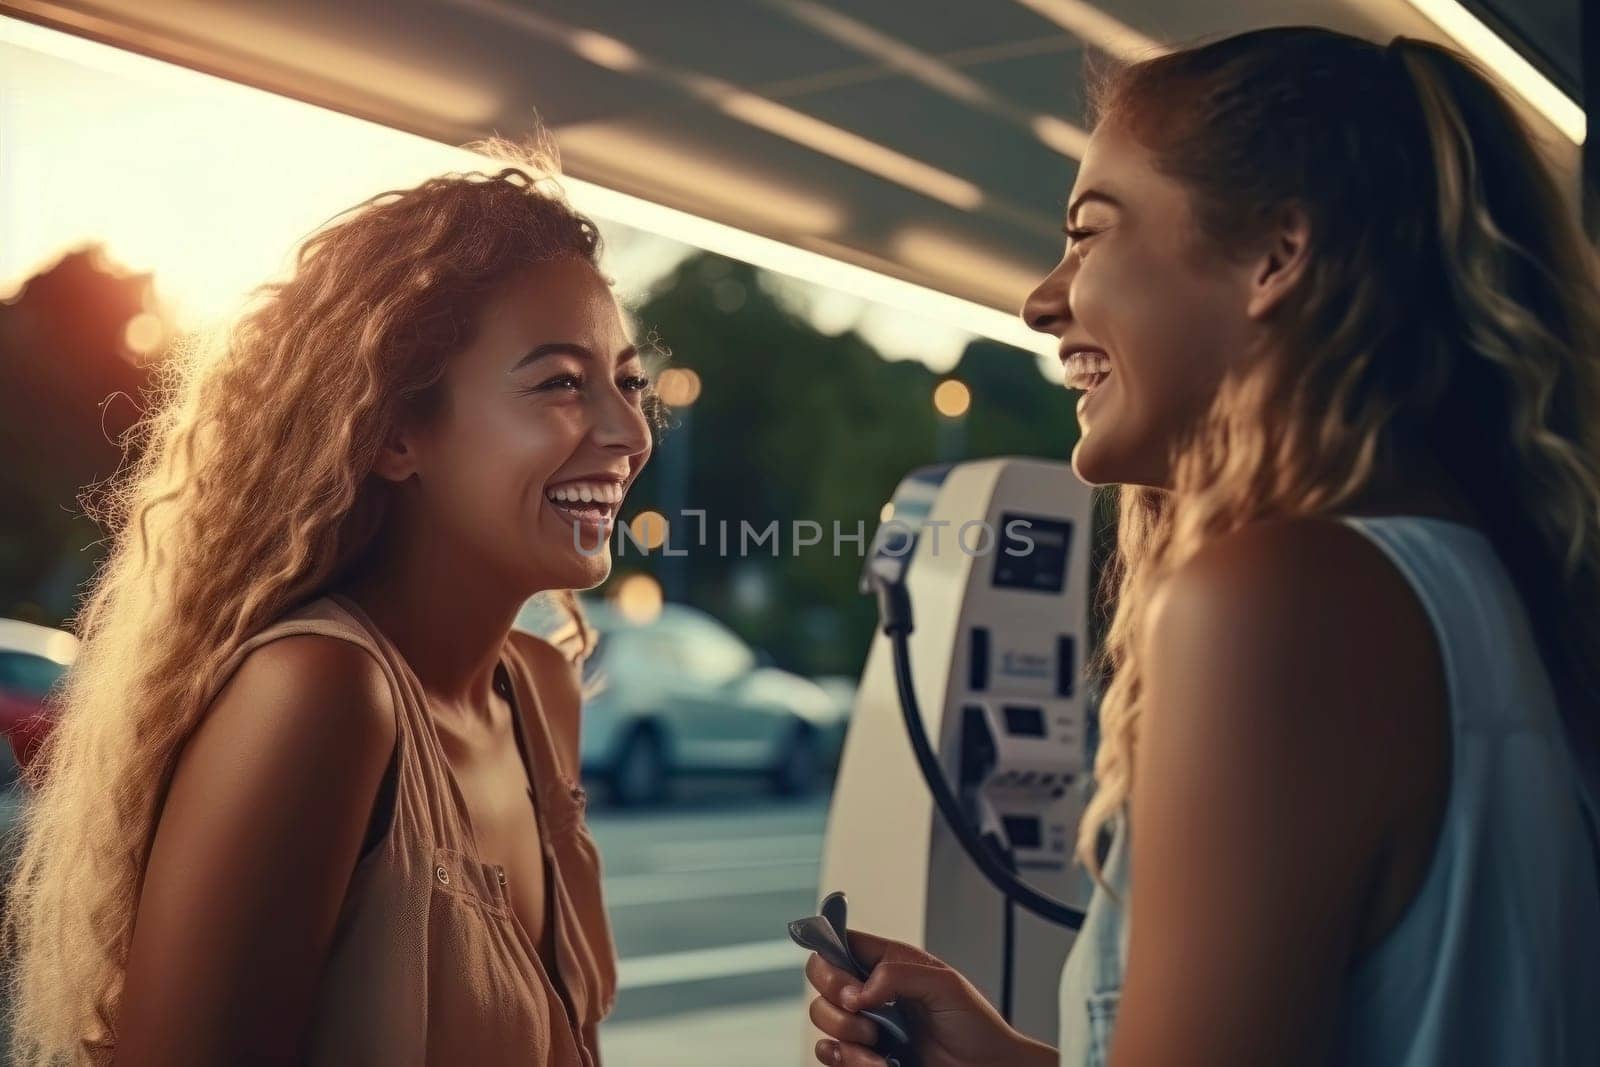 Girls Laughing at a City Meetup by pippocarlot